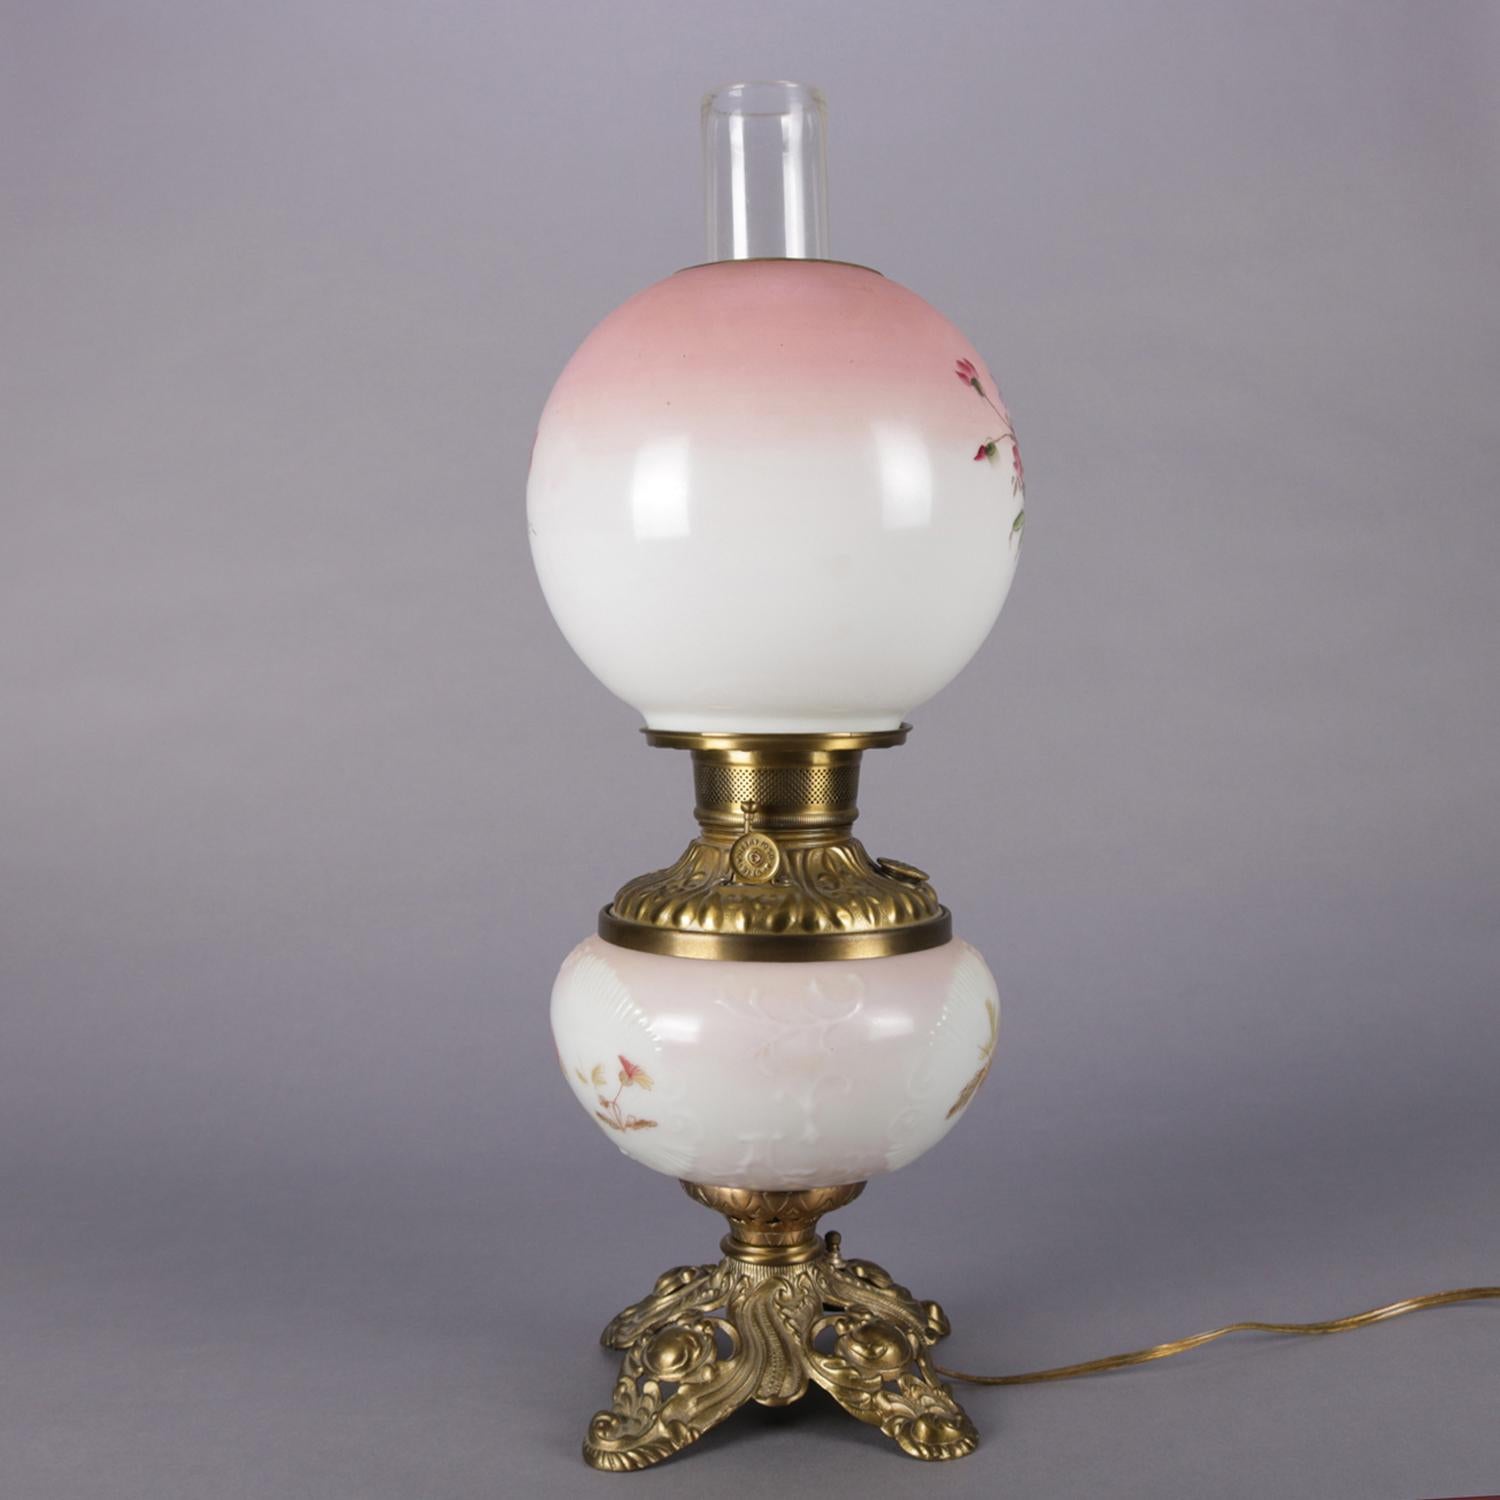 Victorian Electrified Hand-Painted Floral and Brass Gone-With-The-Wind Lamp, 19th Century